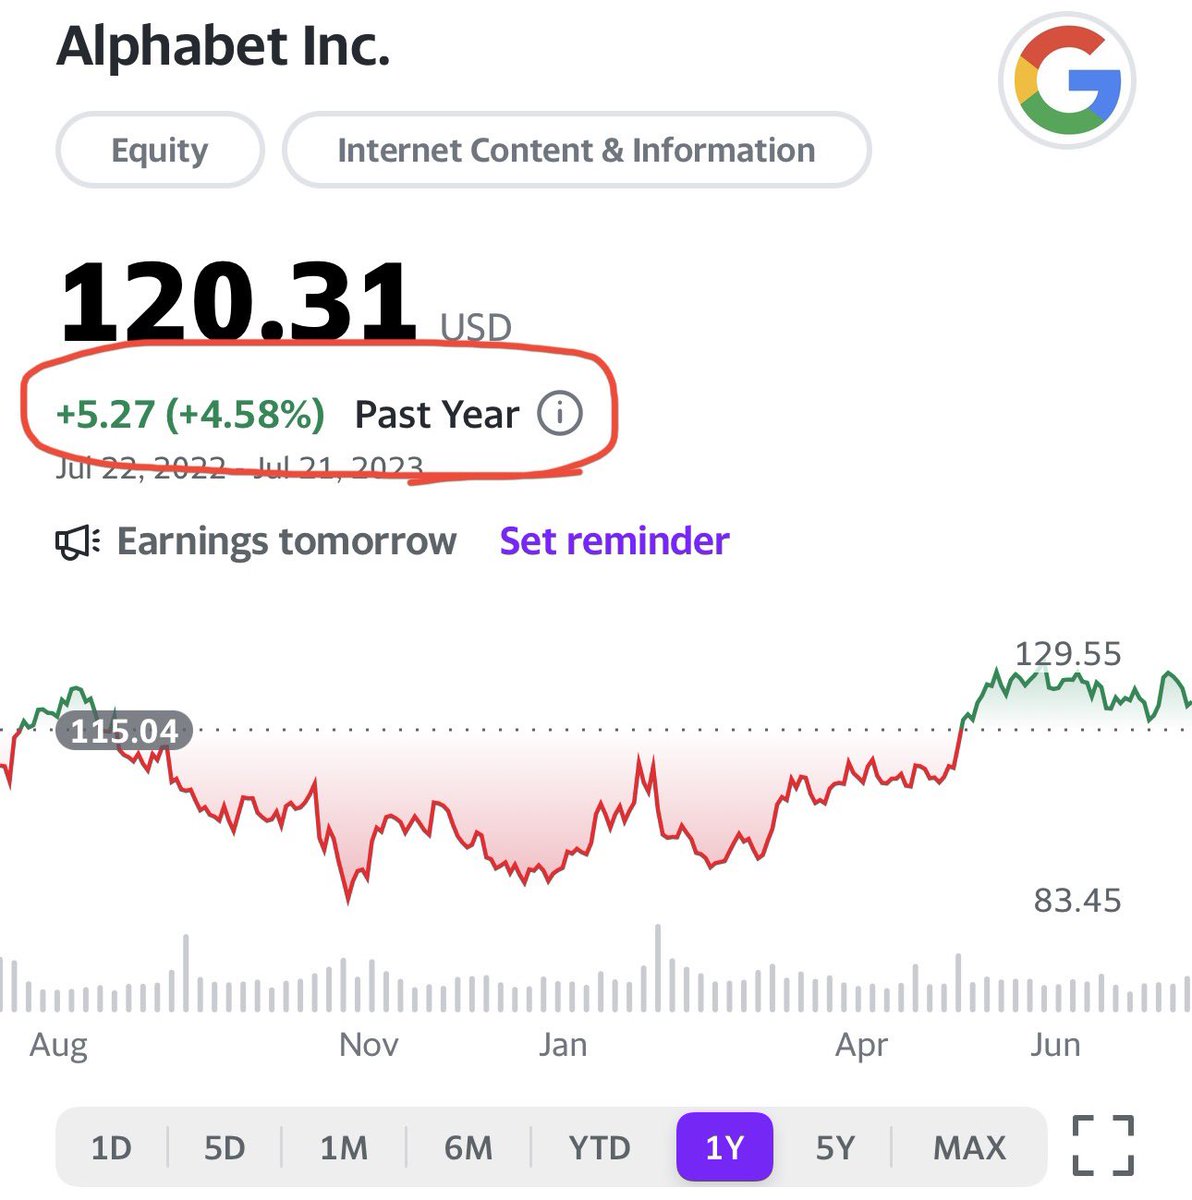 Context Matters.

Google is only up 4% over the last year and is still down 22% from its highs.

Commentators saying the market is running hot or is due for more than the 2% pullback we just had need to zoom out.

$GOOG @Google @sundarpichai @fundstrat @MarkNewtonCMT @CNBC https://t.co/k6IopGxDjq